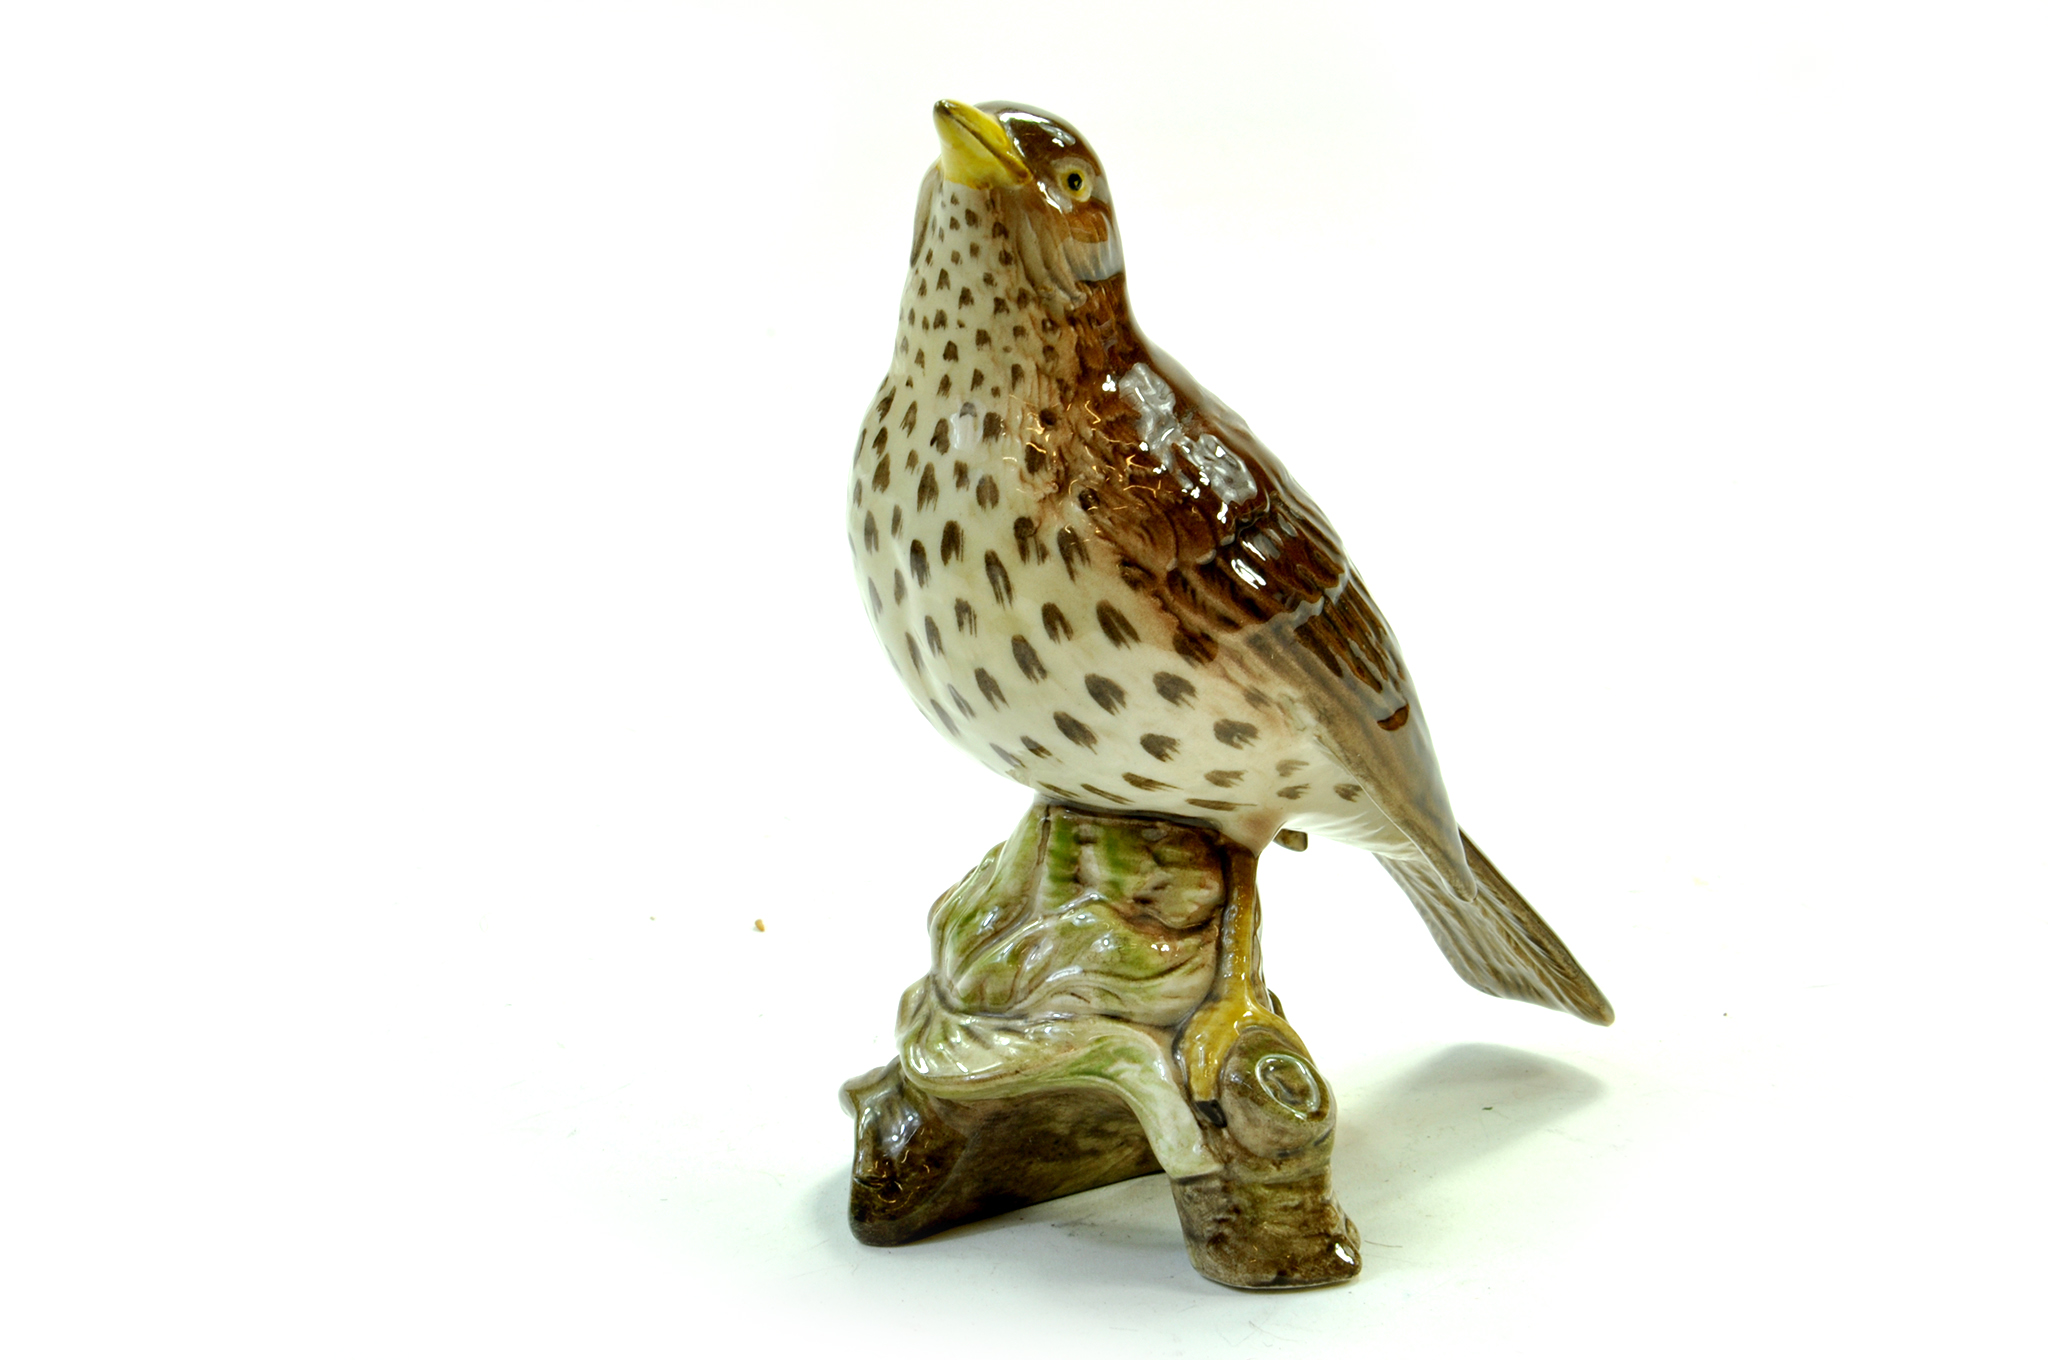 Beswick Songthrush Model No. 2308 5 ¾” – 14.6cm - Brown with speckled breast – Gloss. No Faults.